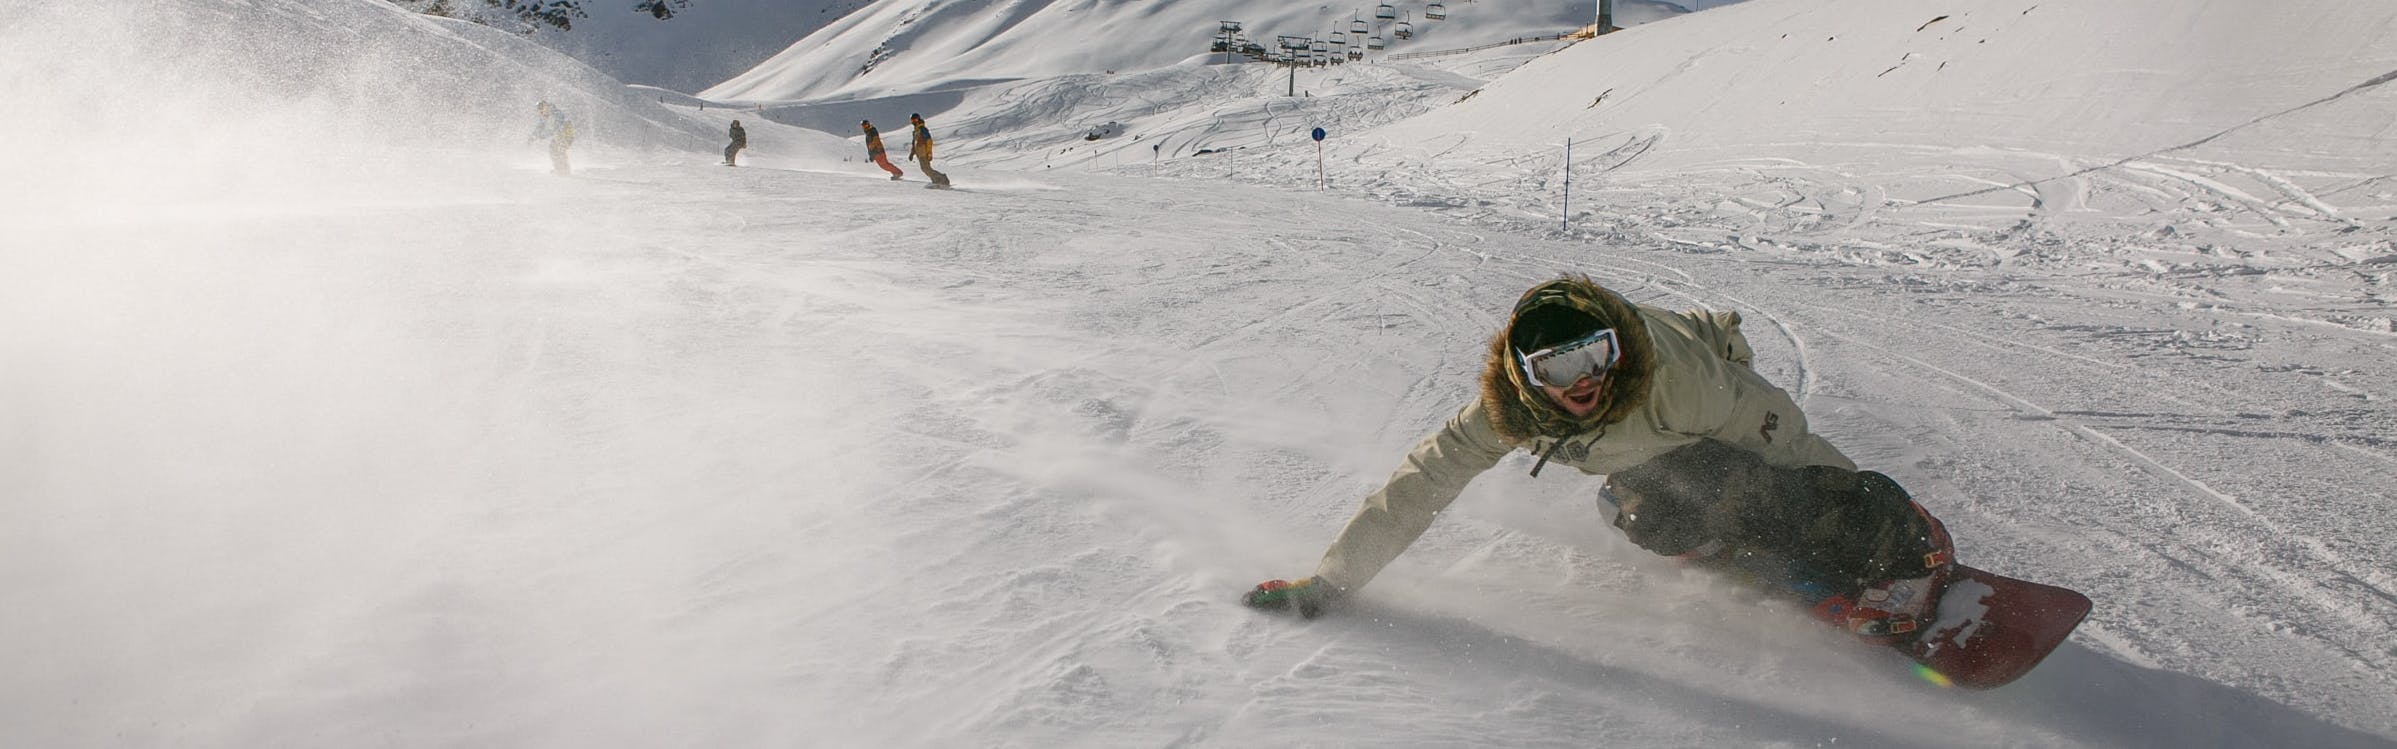 A snowboarder leads a group and executes a turn